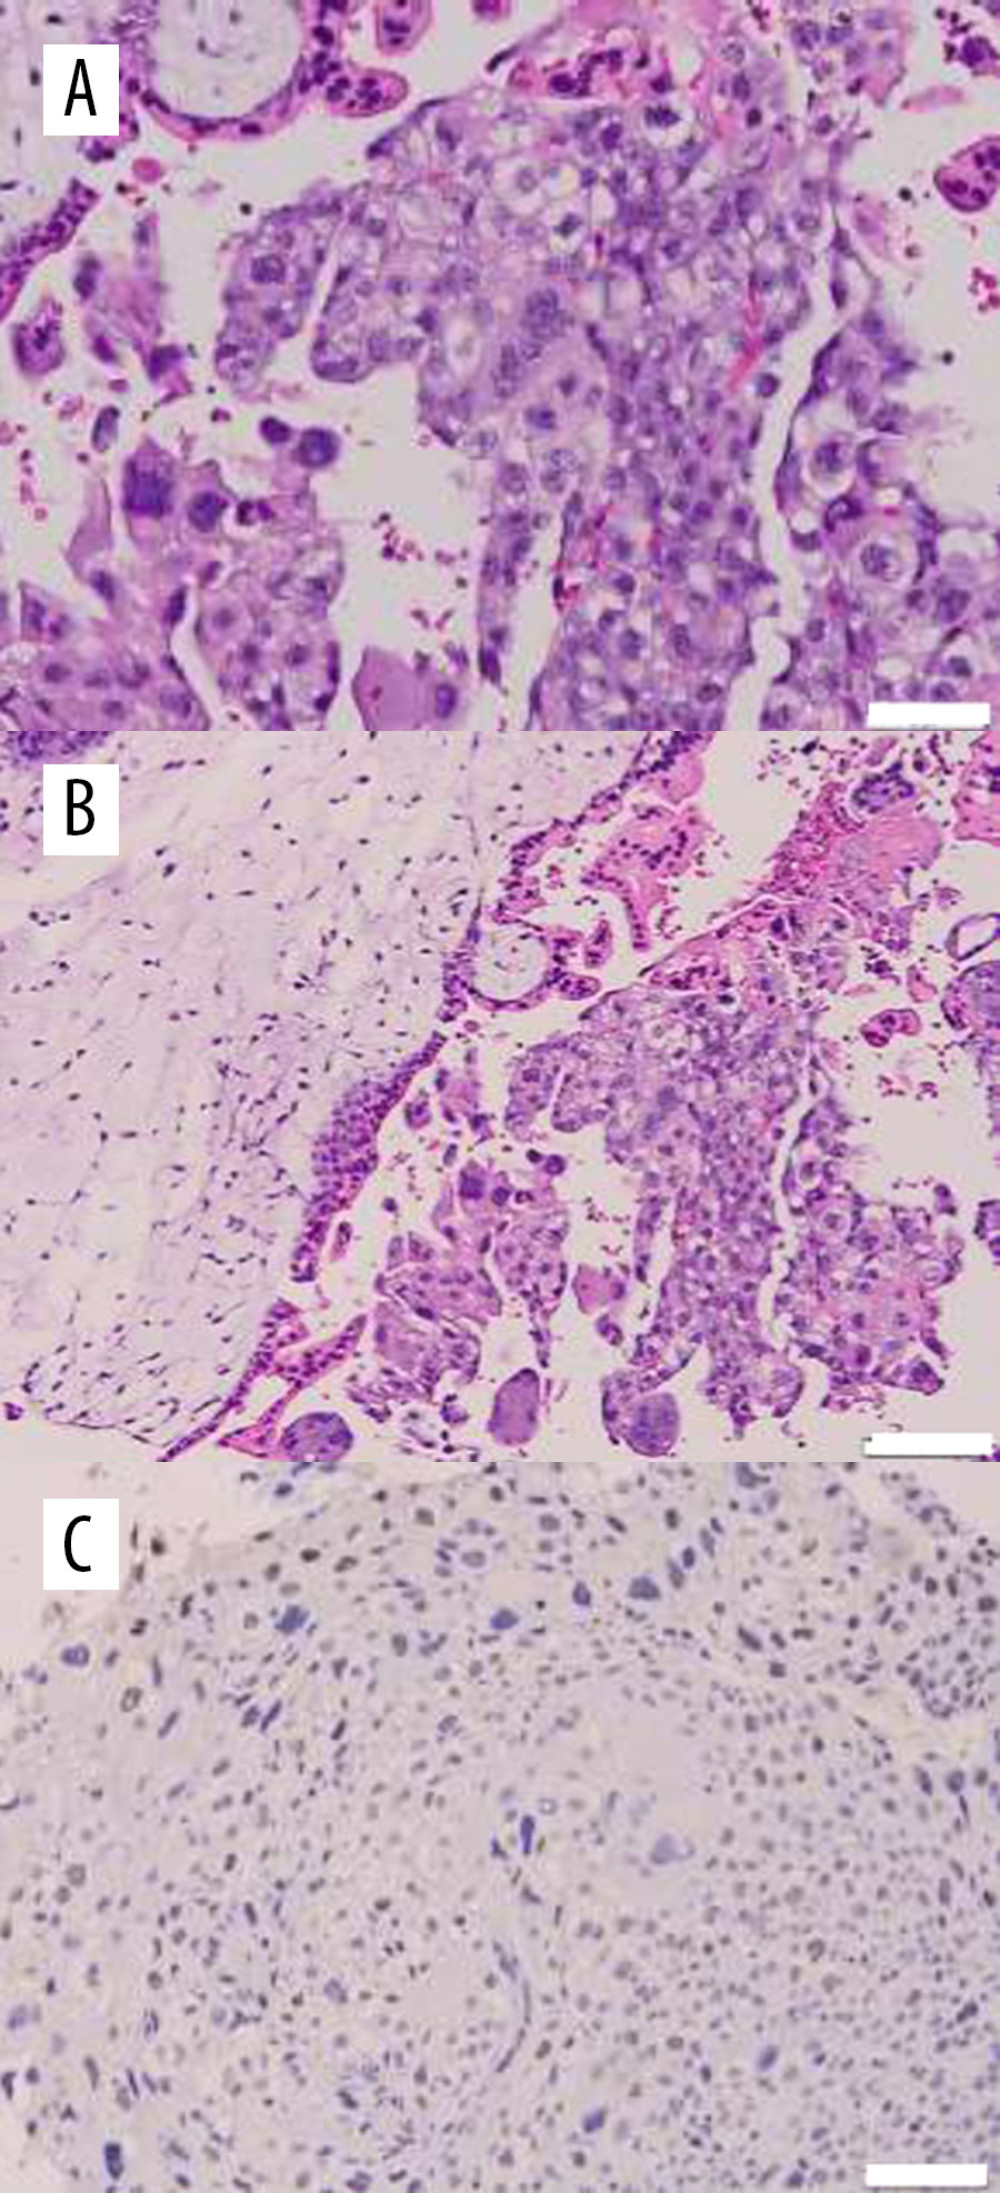 (A) Histopathologic reevaluation of the vaginal mass. (B) Histopathologic reevaluation of the uterine mass. (C) p53 immunohistochemistry of the molar mass. Scale bars=100 µm.